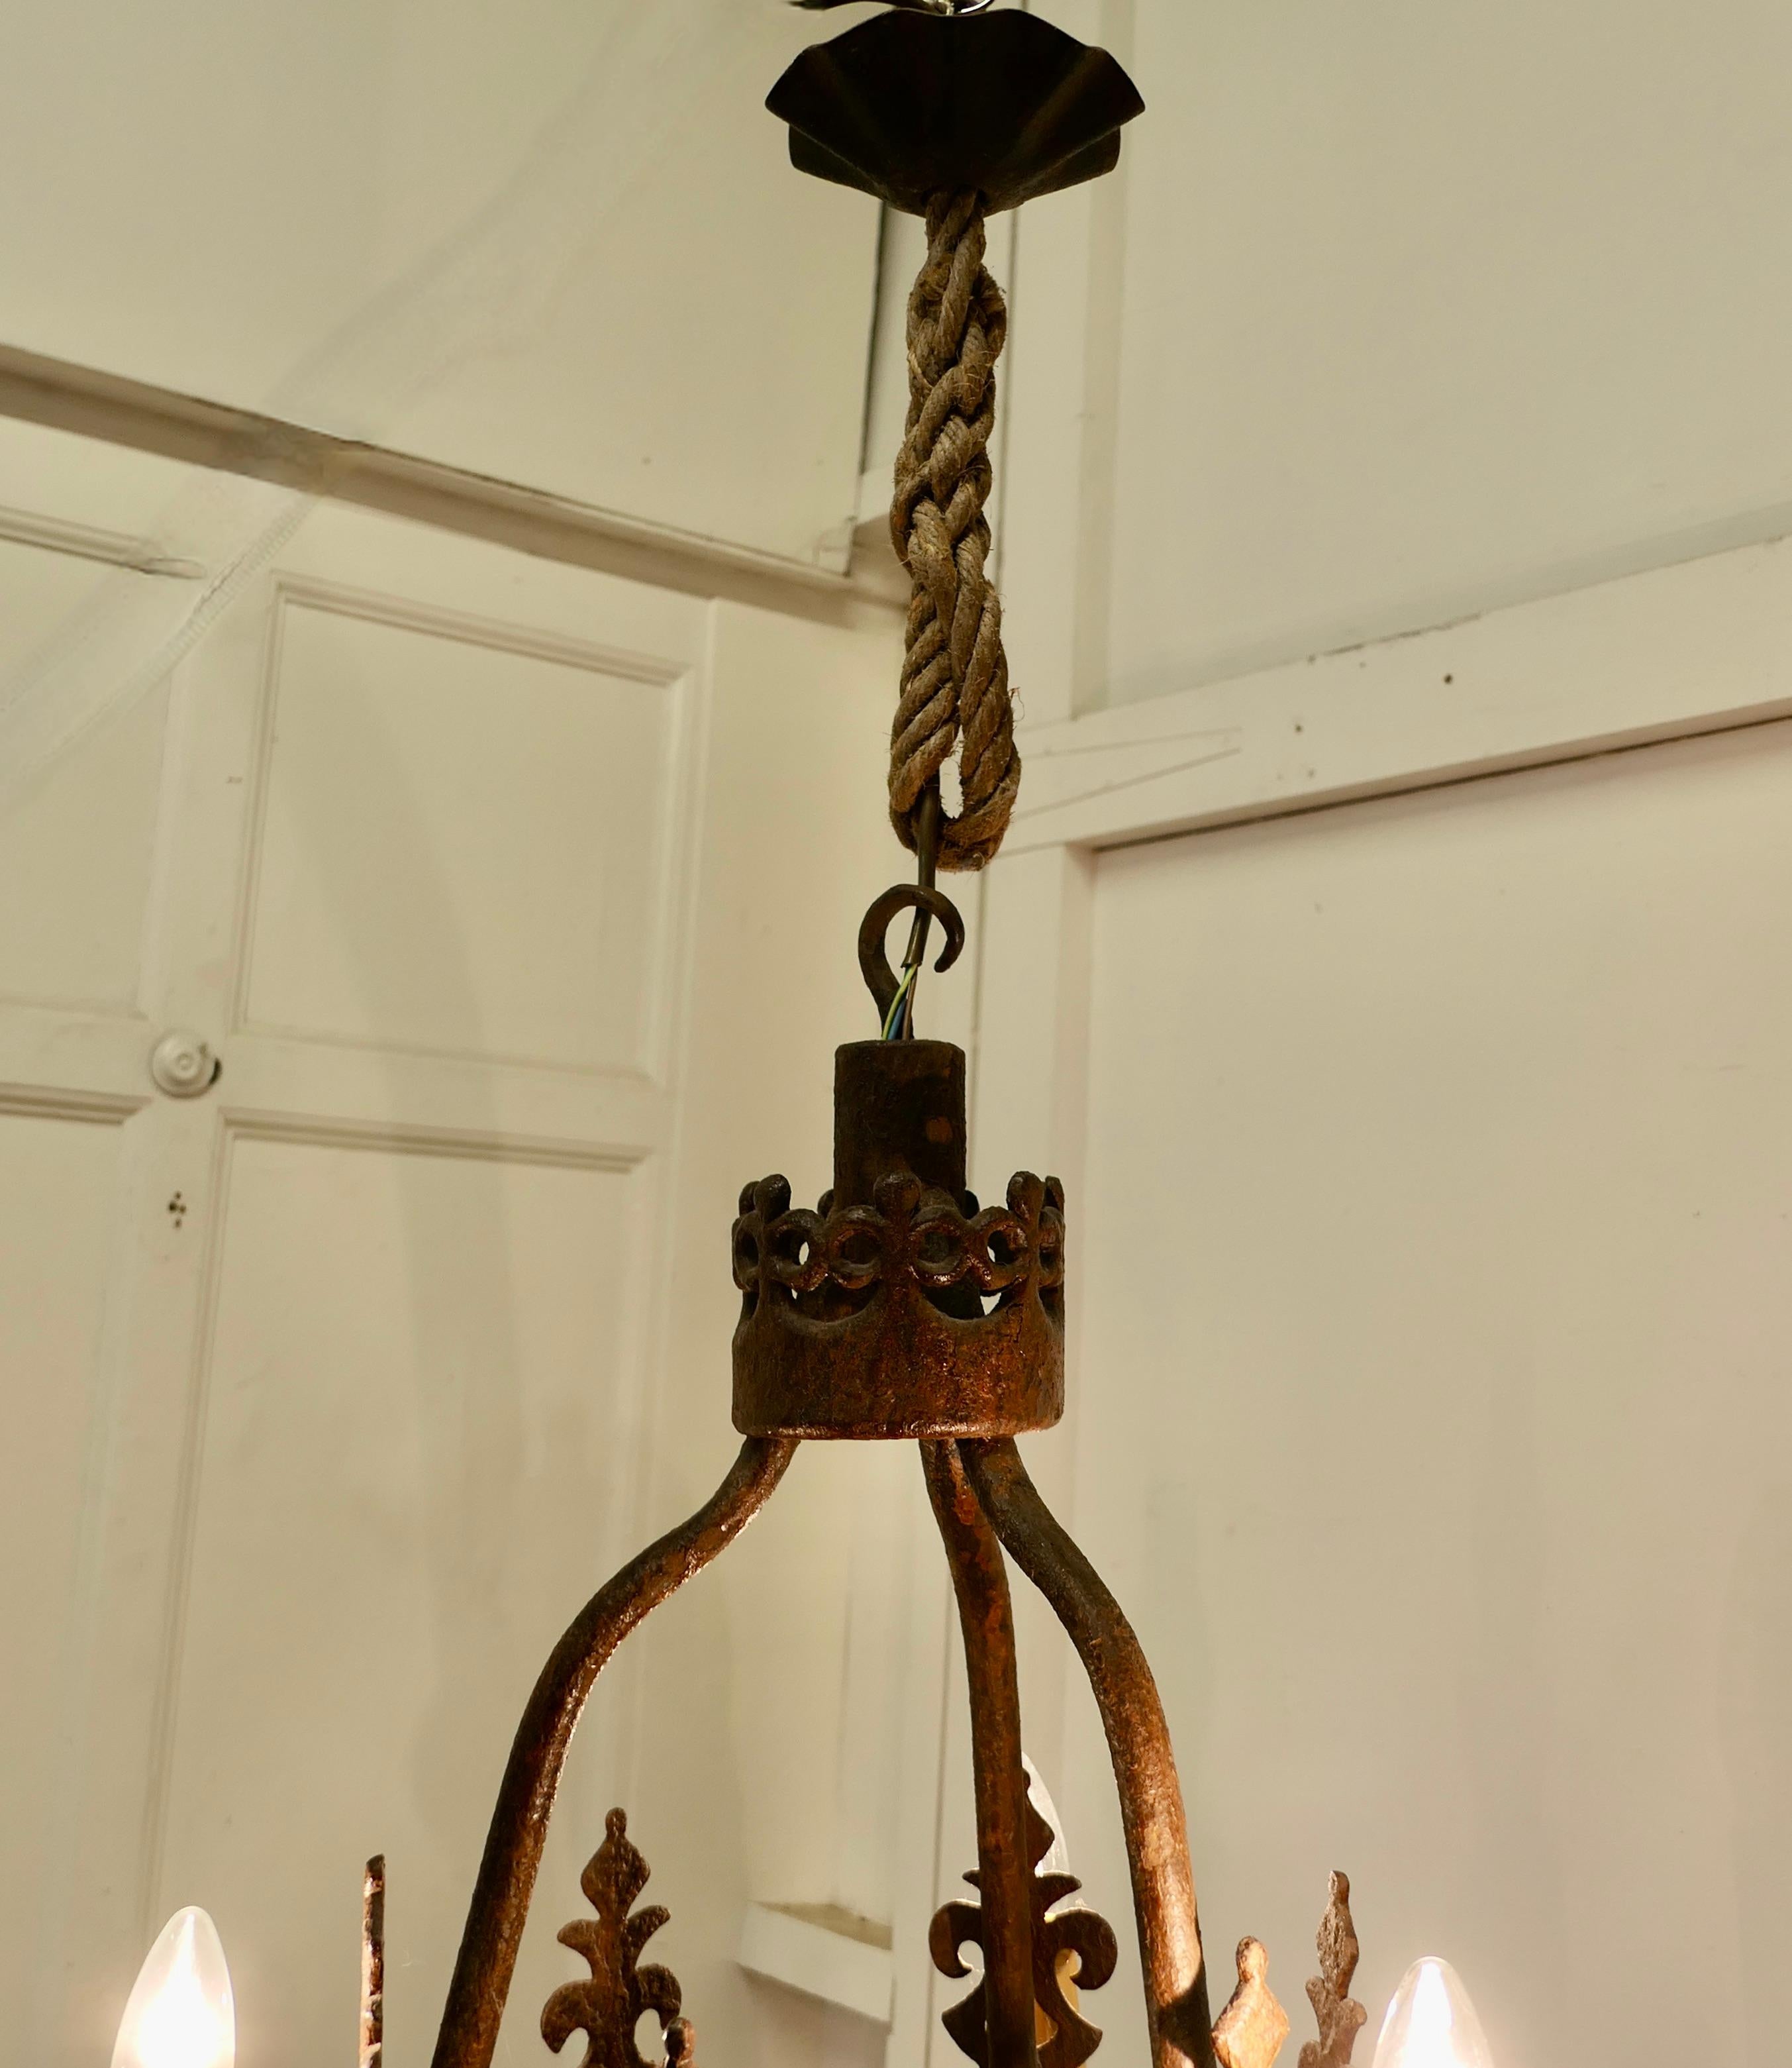 Heavy French Blacksmith Made Iron Game Hanger, made as a Light Fitting

A very old piece with lots of Character, the frame is decorated with fleur des lys and has been adapted and wired to make very unusual ceiling light

The hanger has 3 bulb